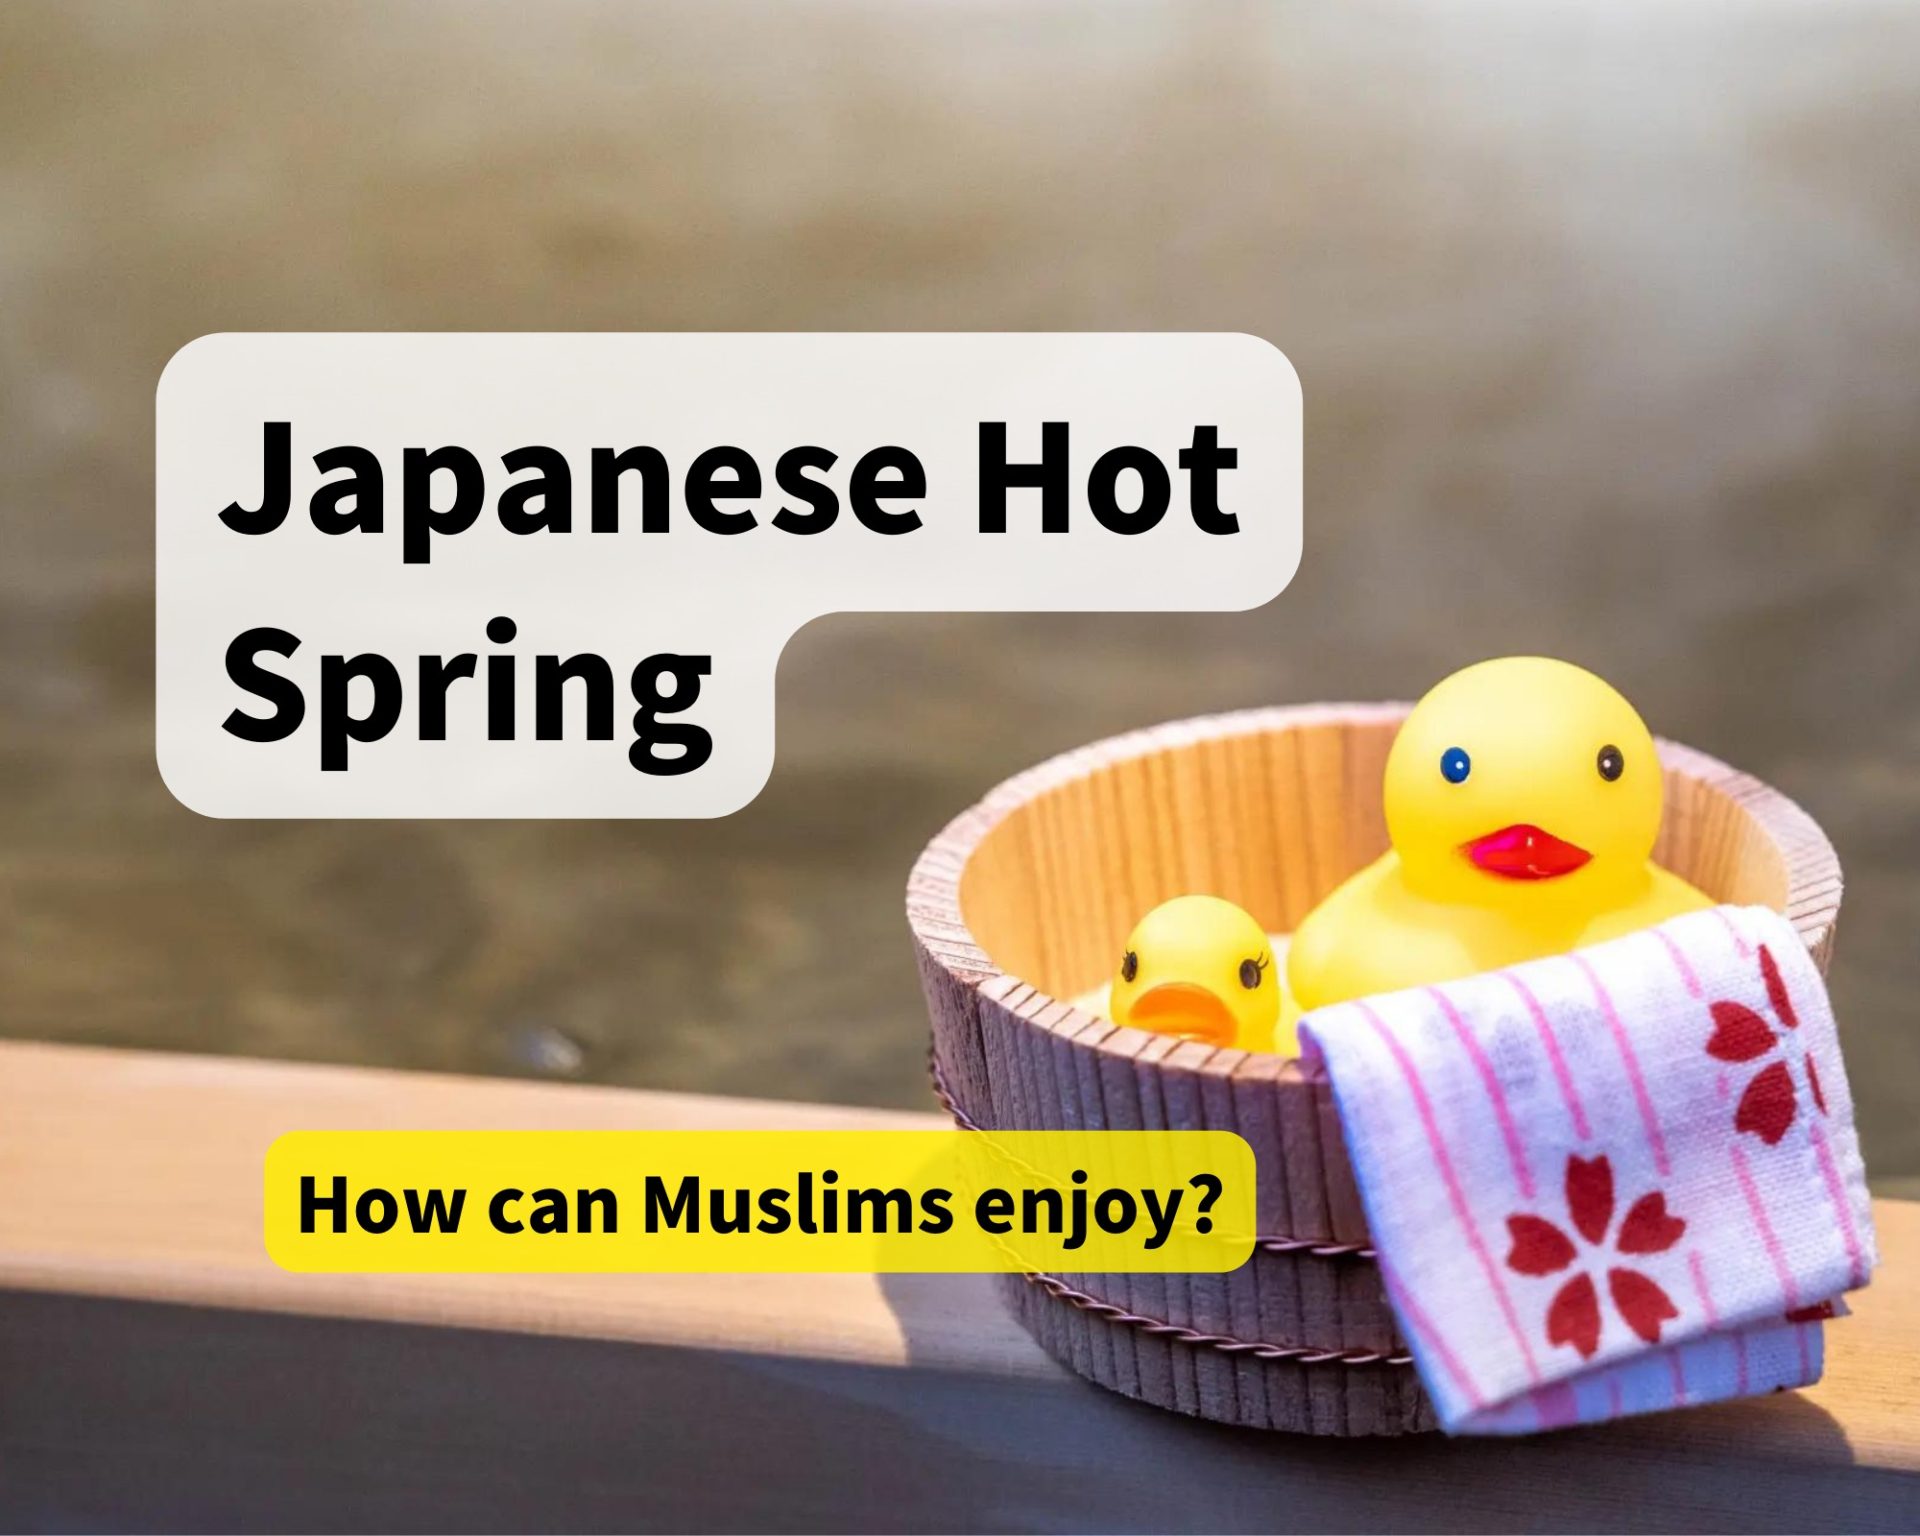 Hot spring for Muslims